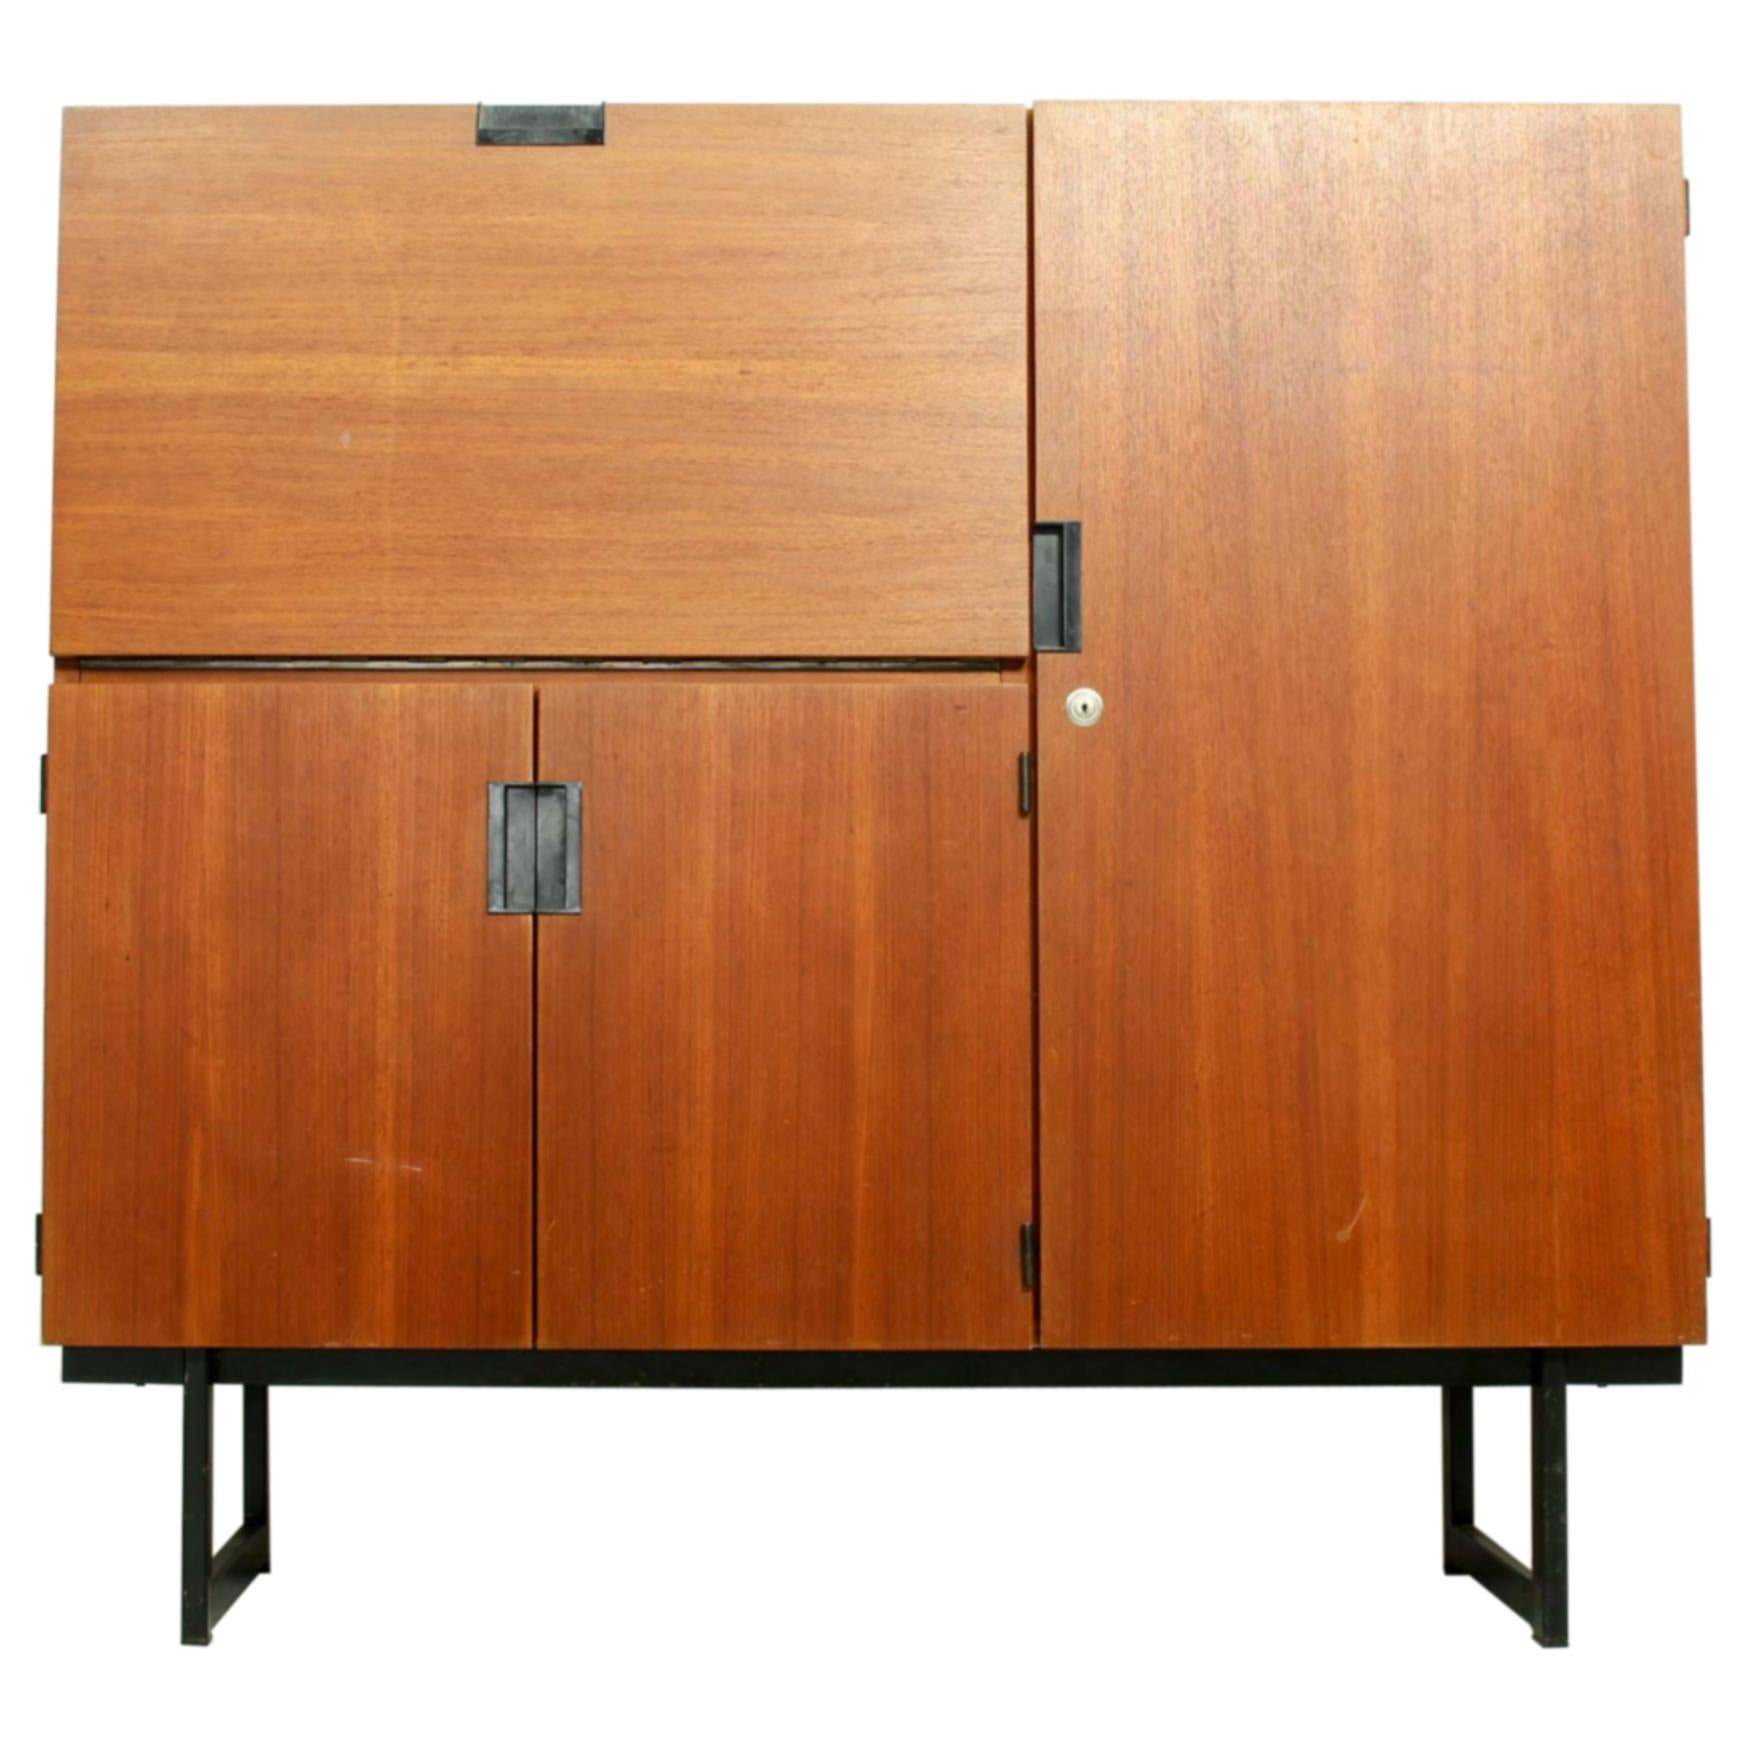 Japanese Series Highboard by Cees Braakman for Pastoe, the Netherlands, 1960s